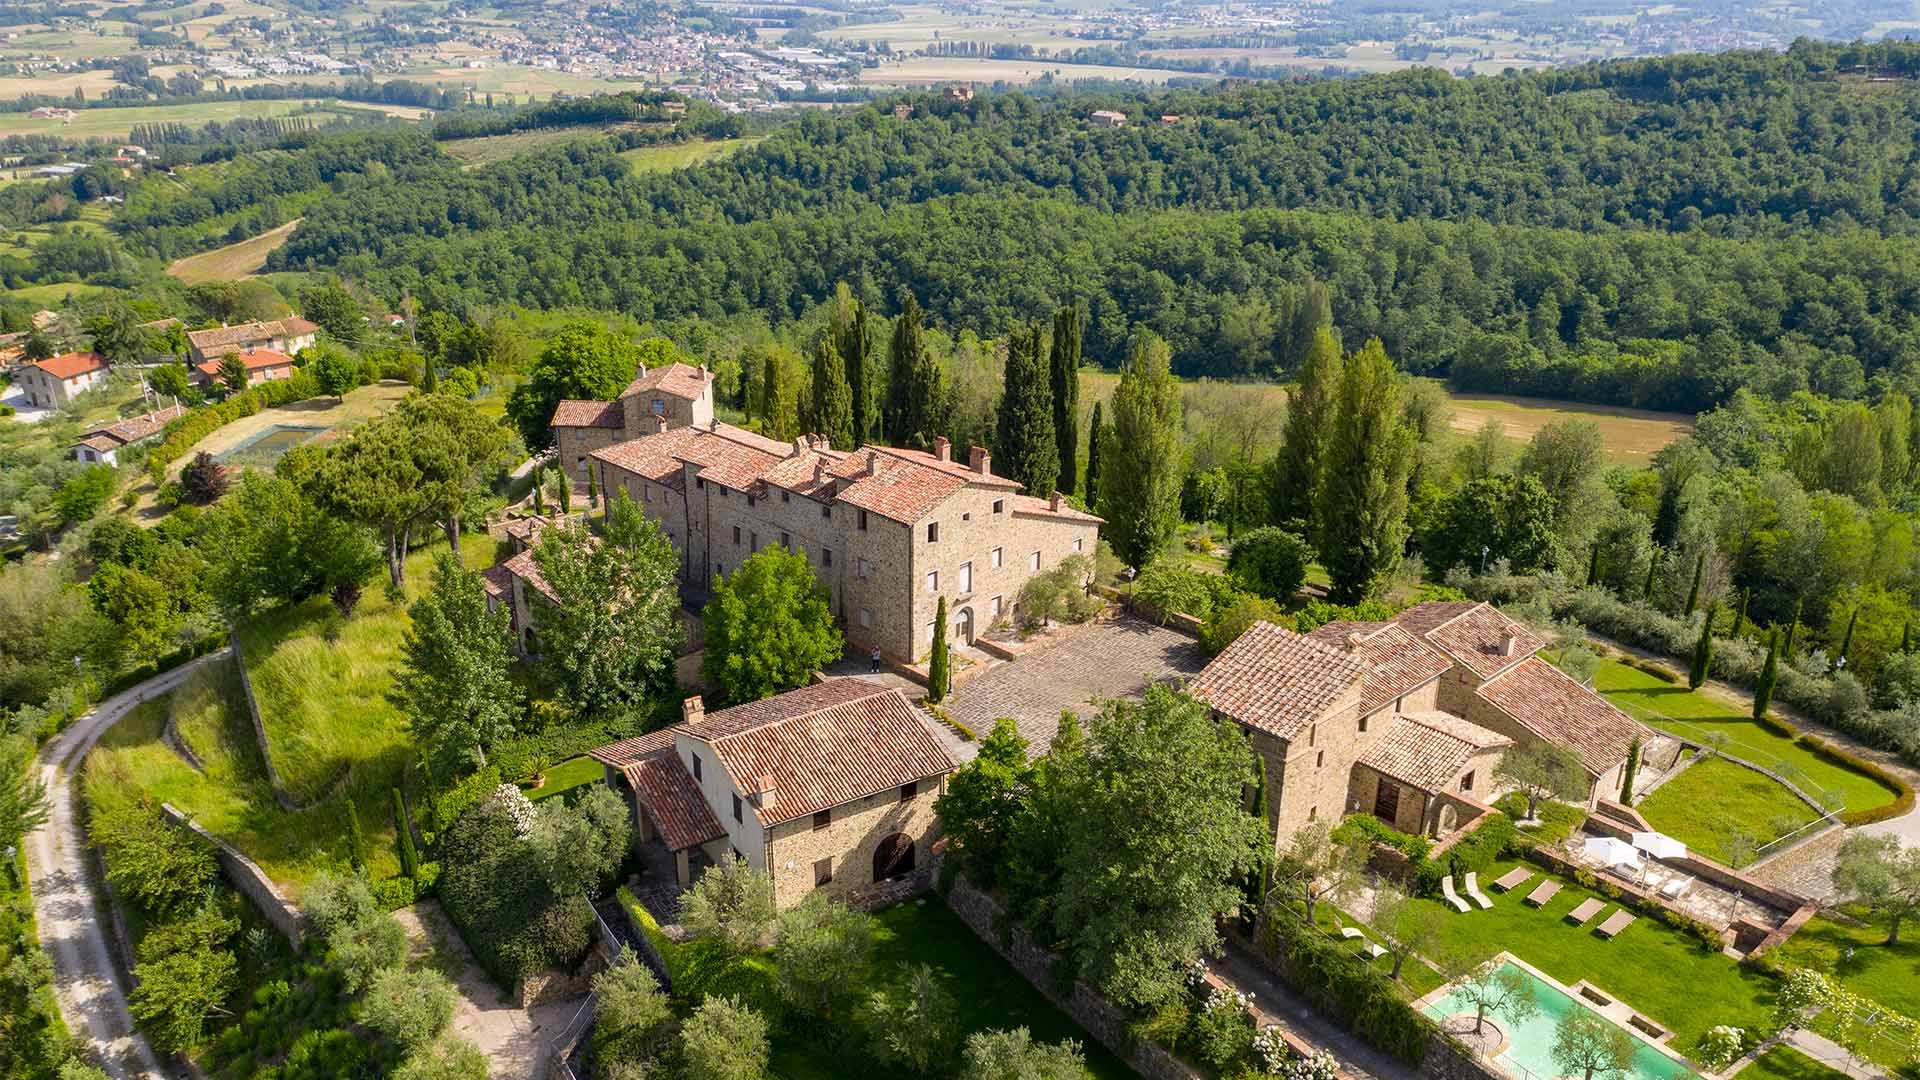 Francis York Ancient Hamlet For Sale Near the Border of Tuscany and Umbria 25.jpg